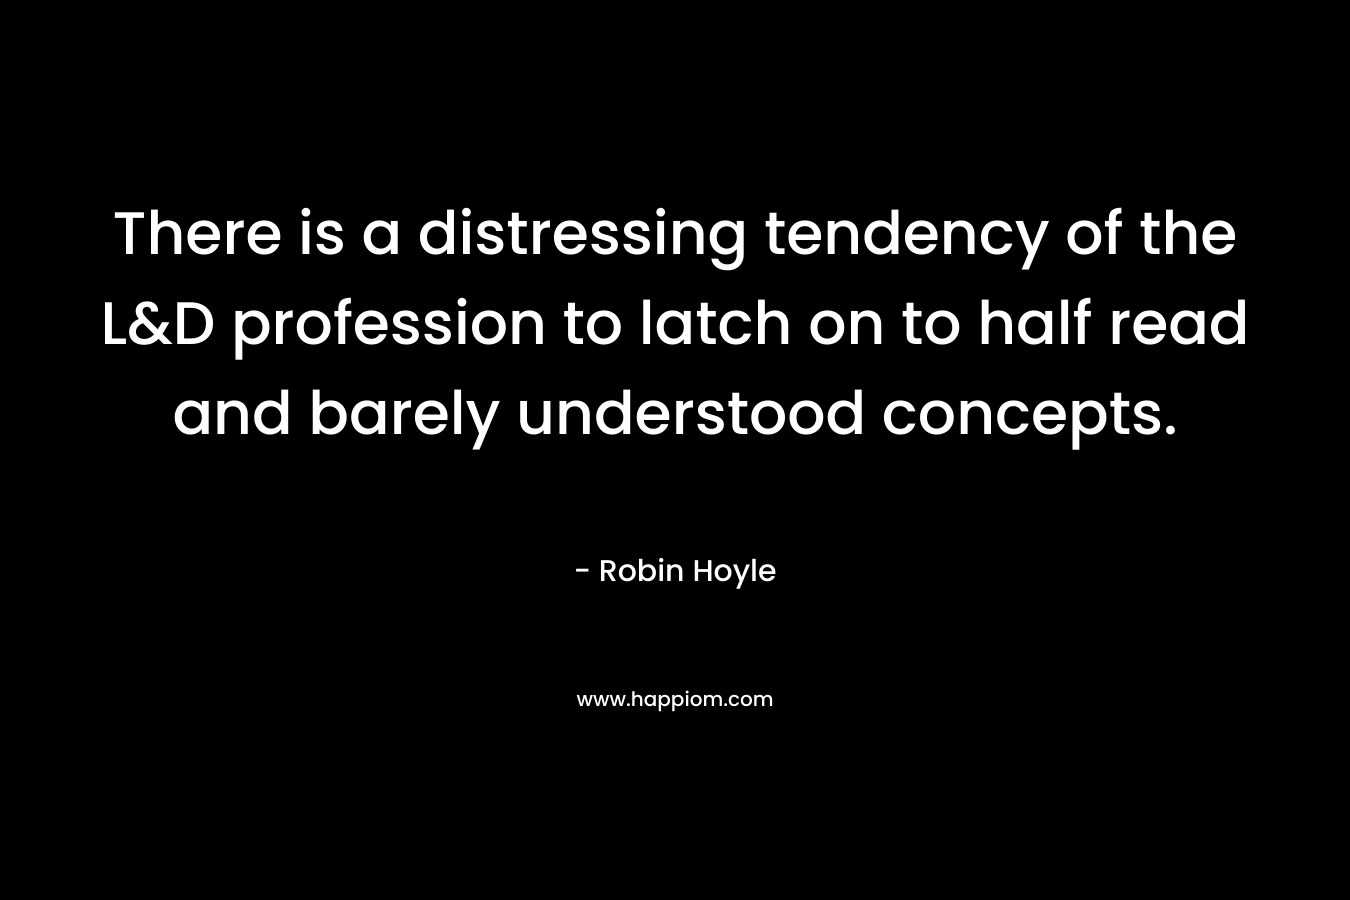 There is a distressing tendency of the L&D profession to latch on to half read and barely understood concepts. – Robin Hoyle